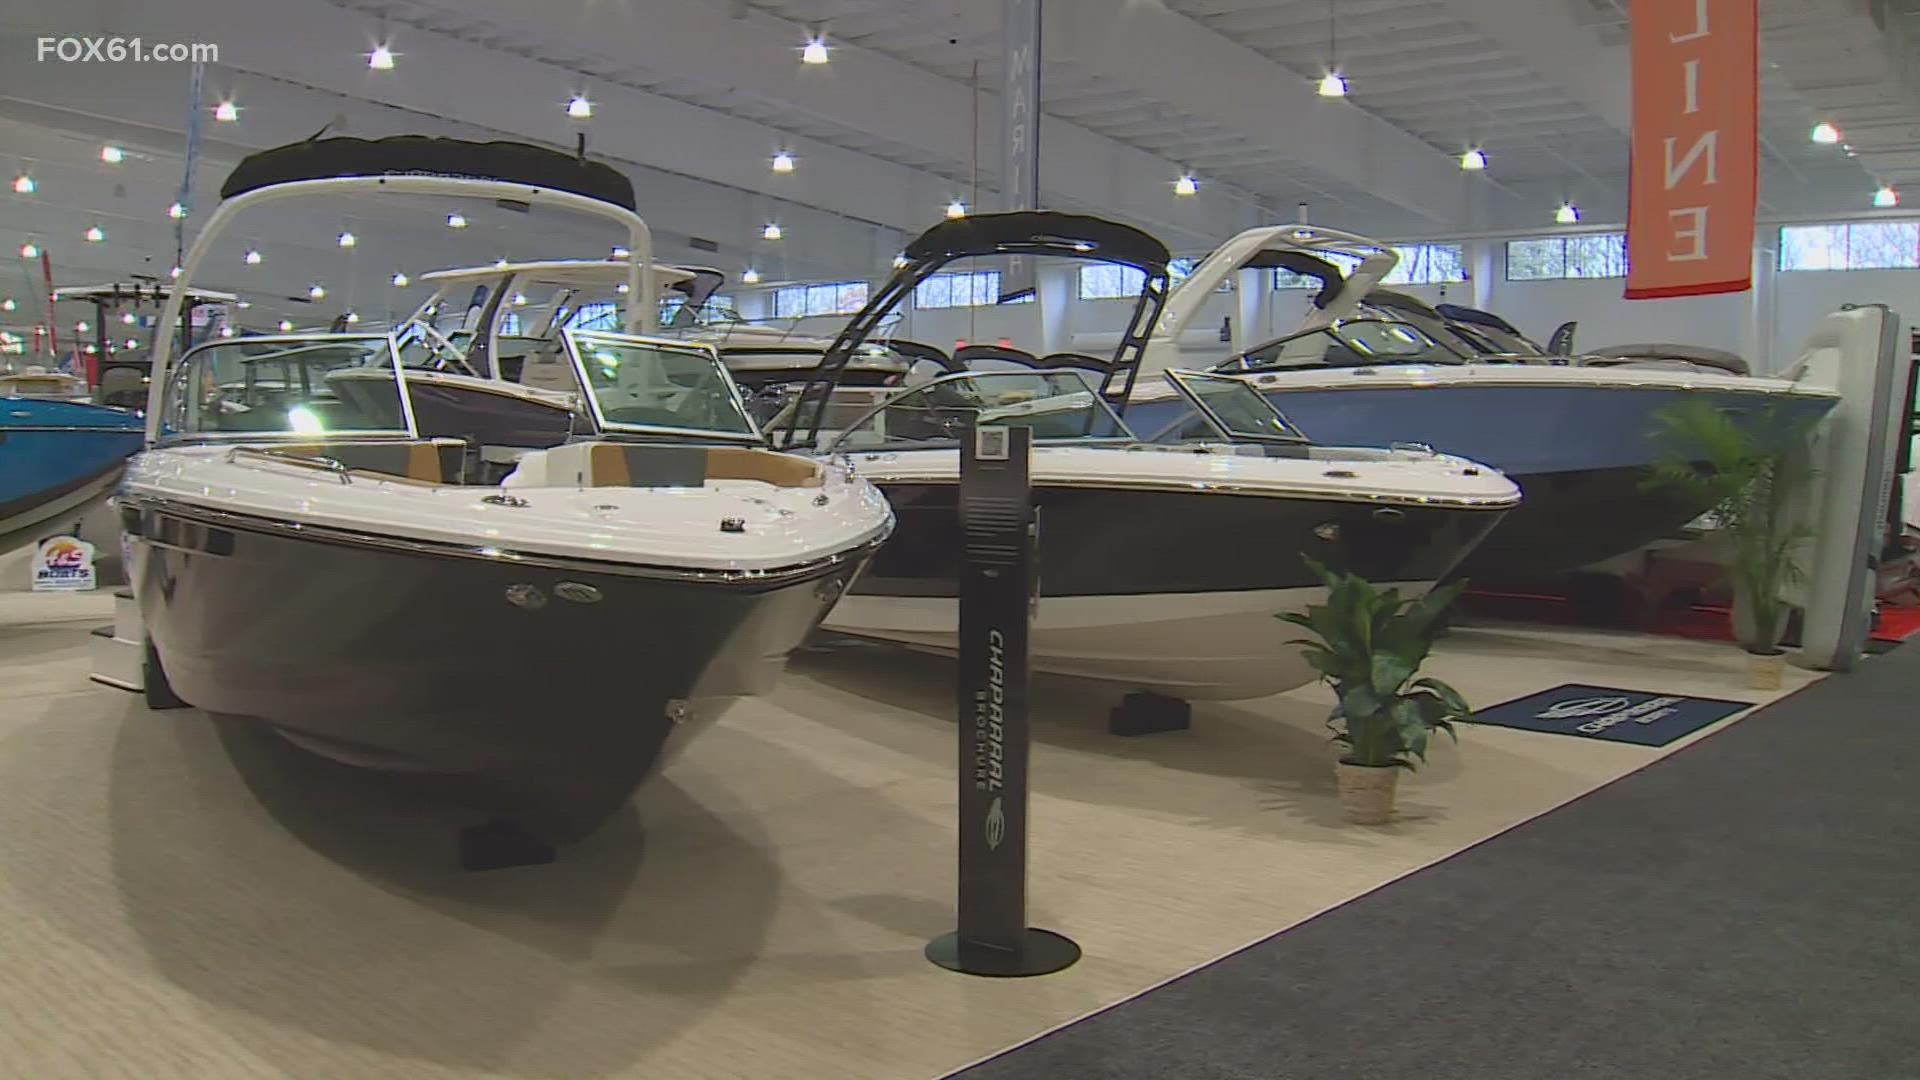 The expo center is filled with an array of boats and personal watercraft. There are about 150,000 square feet dedicated to all things aquatic.